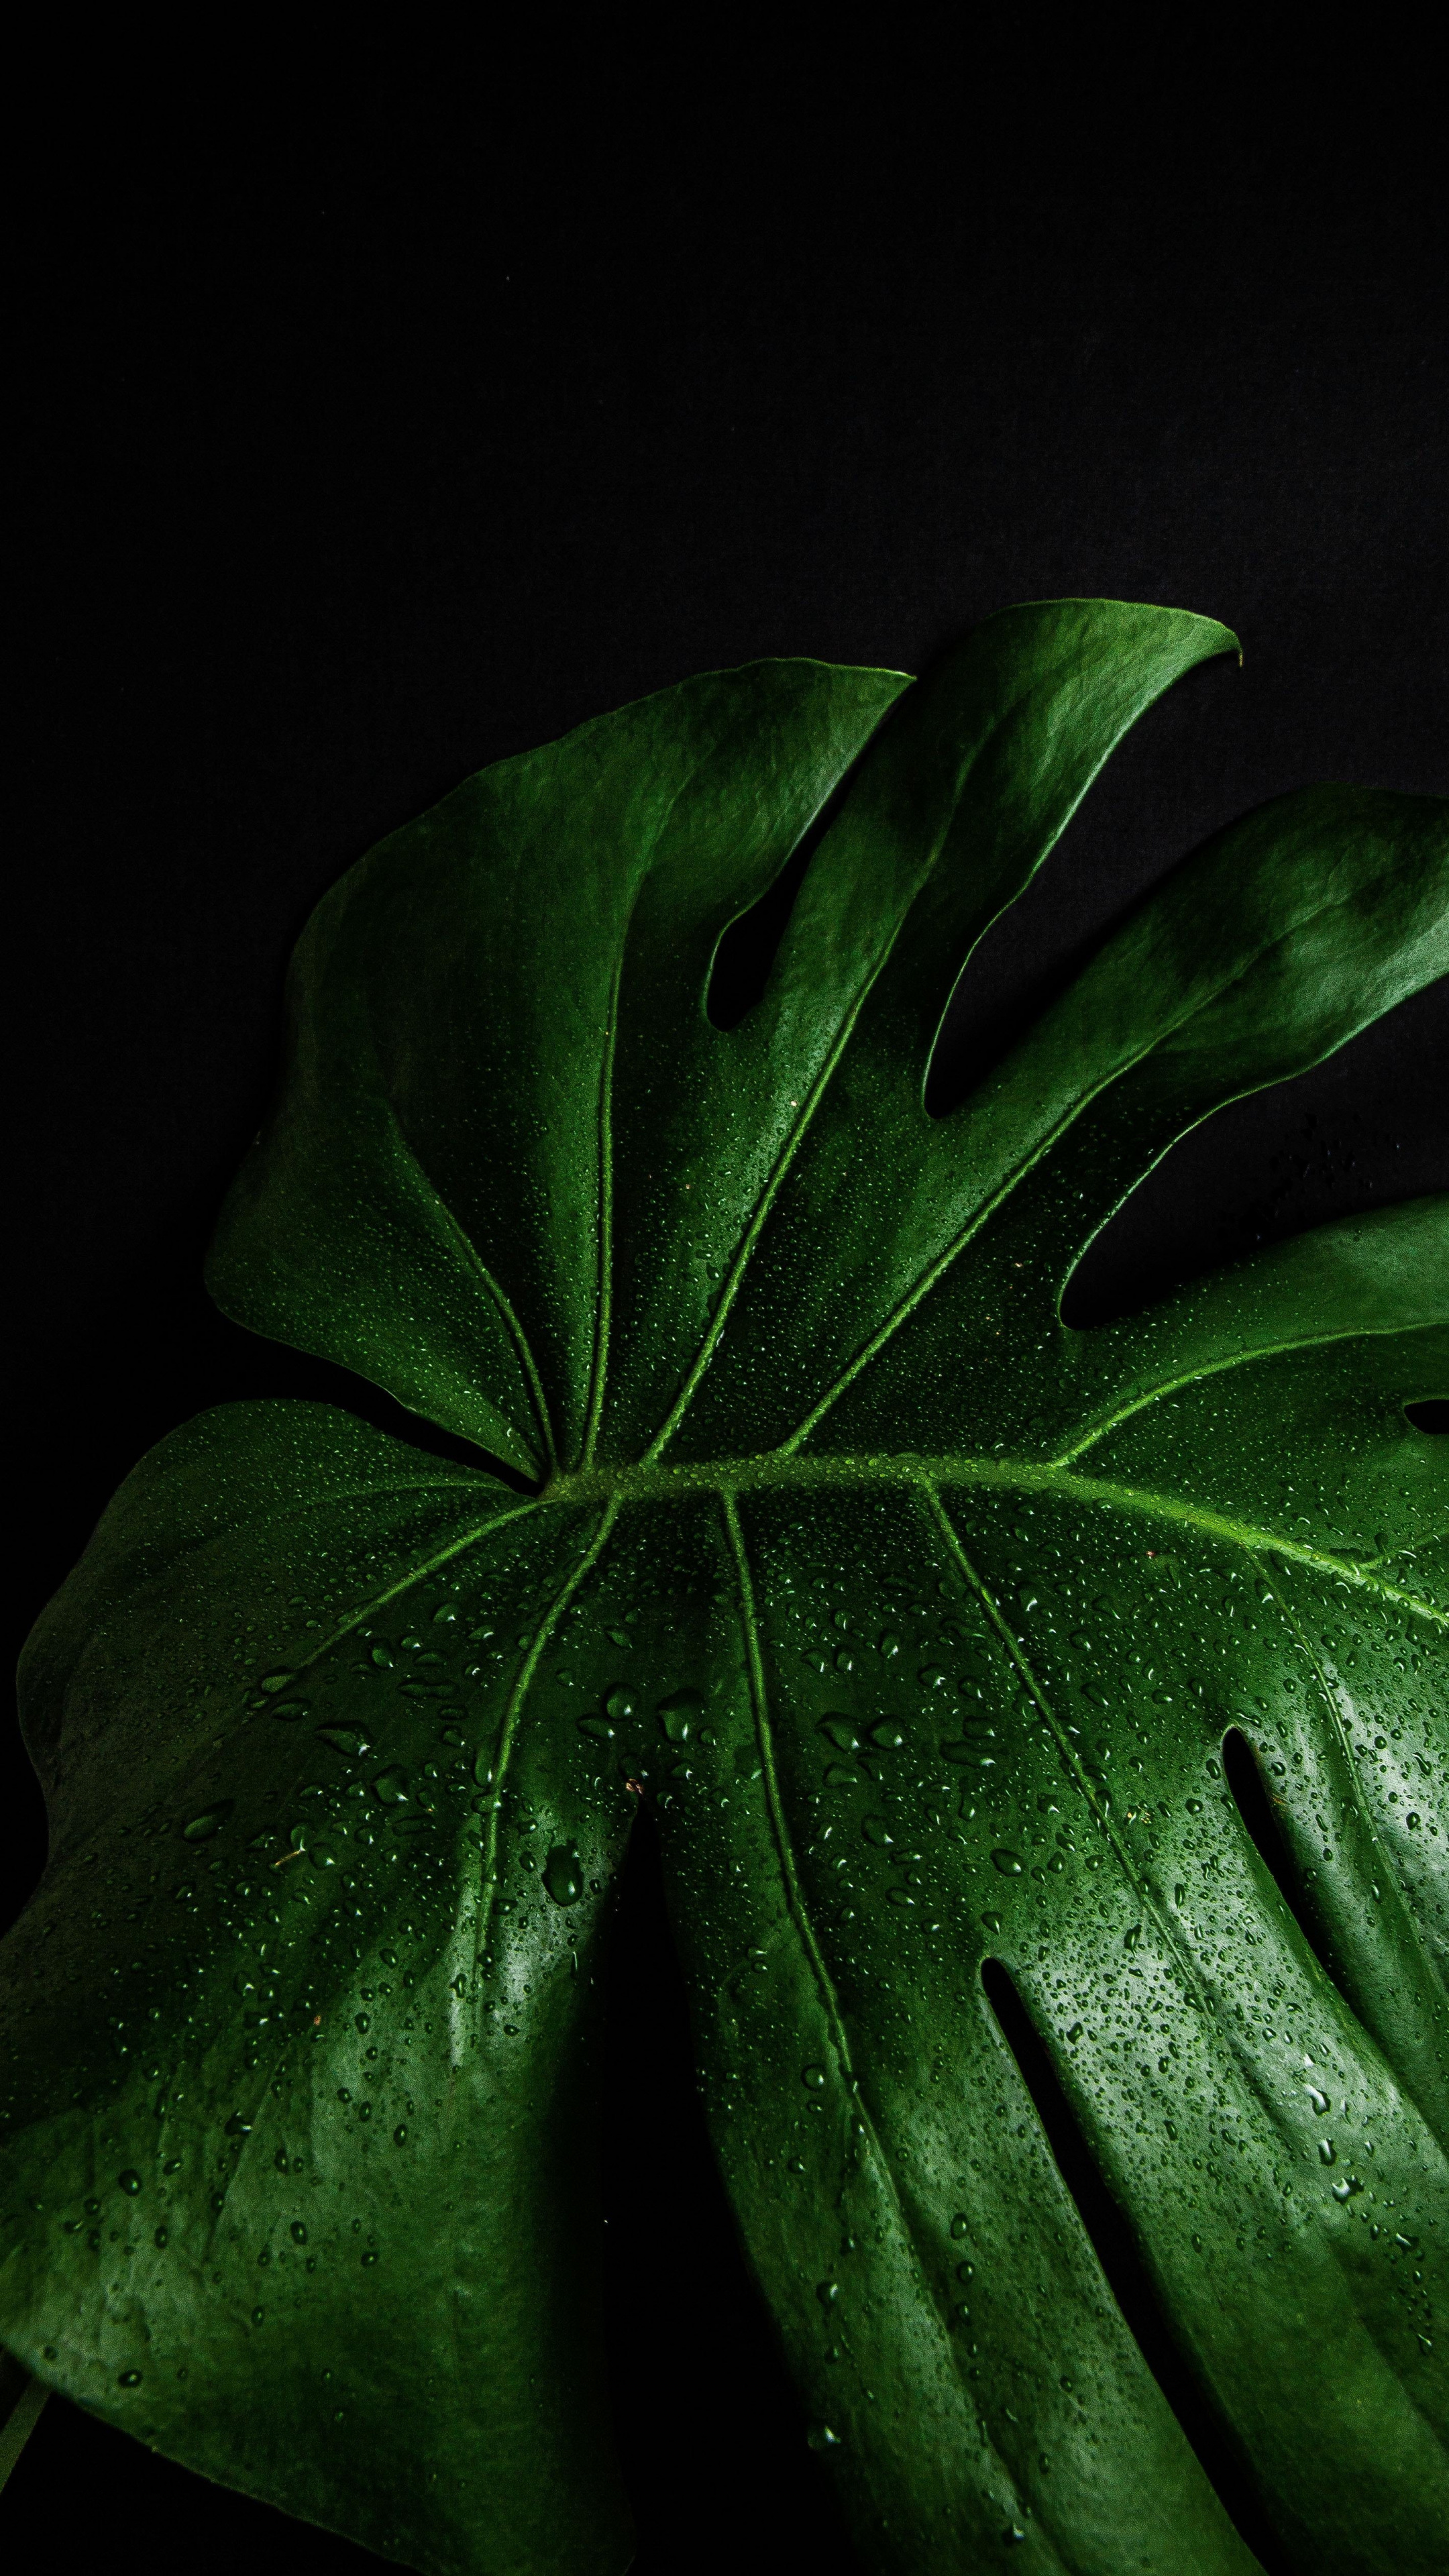 Green Leaf: Close-up monstera deliciosa, A large, leathery, glossy, pinnate, heart-shaped leaf. 2160x3840 4K Wallpaper.